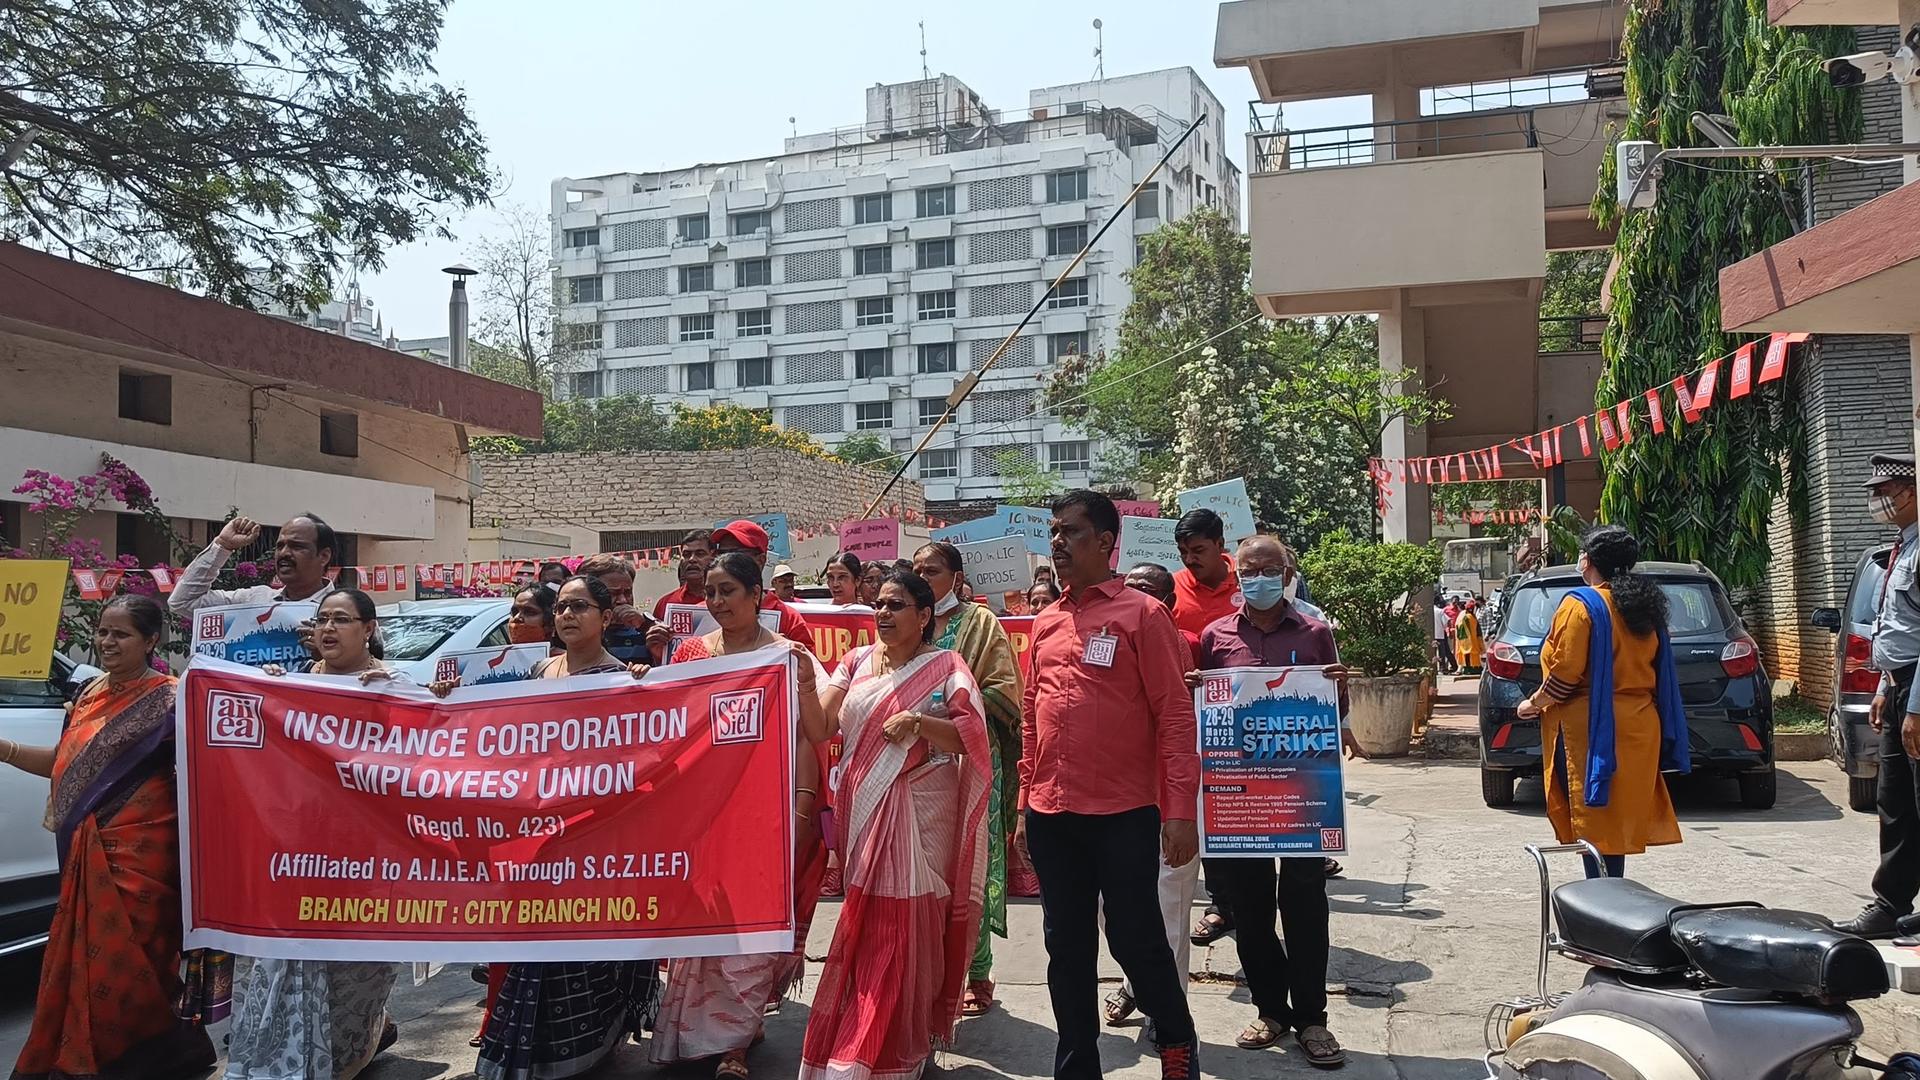 Members of the All India Insurance Employees' Association gather at LIC's office in Hyderabad in southern India to protest against the company's IPO, which they say goes against its ethos.